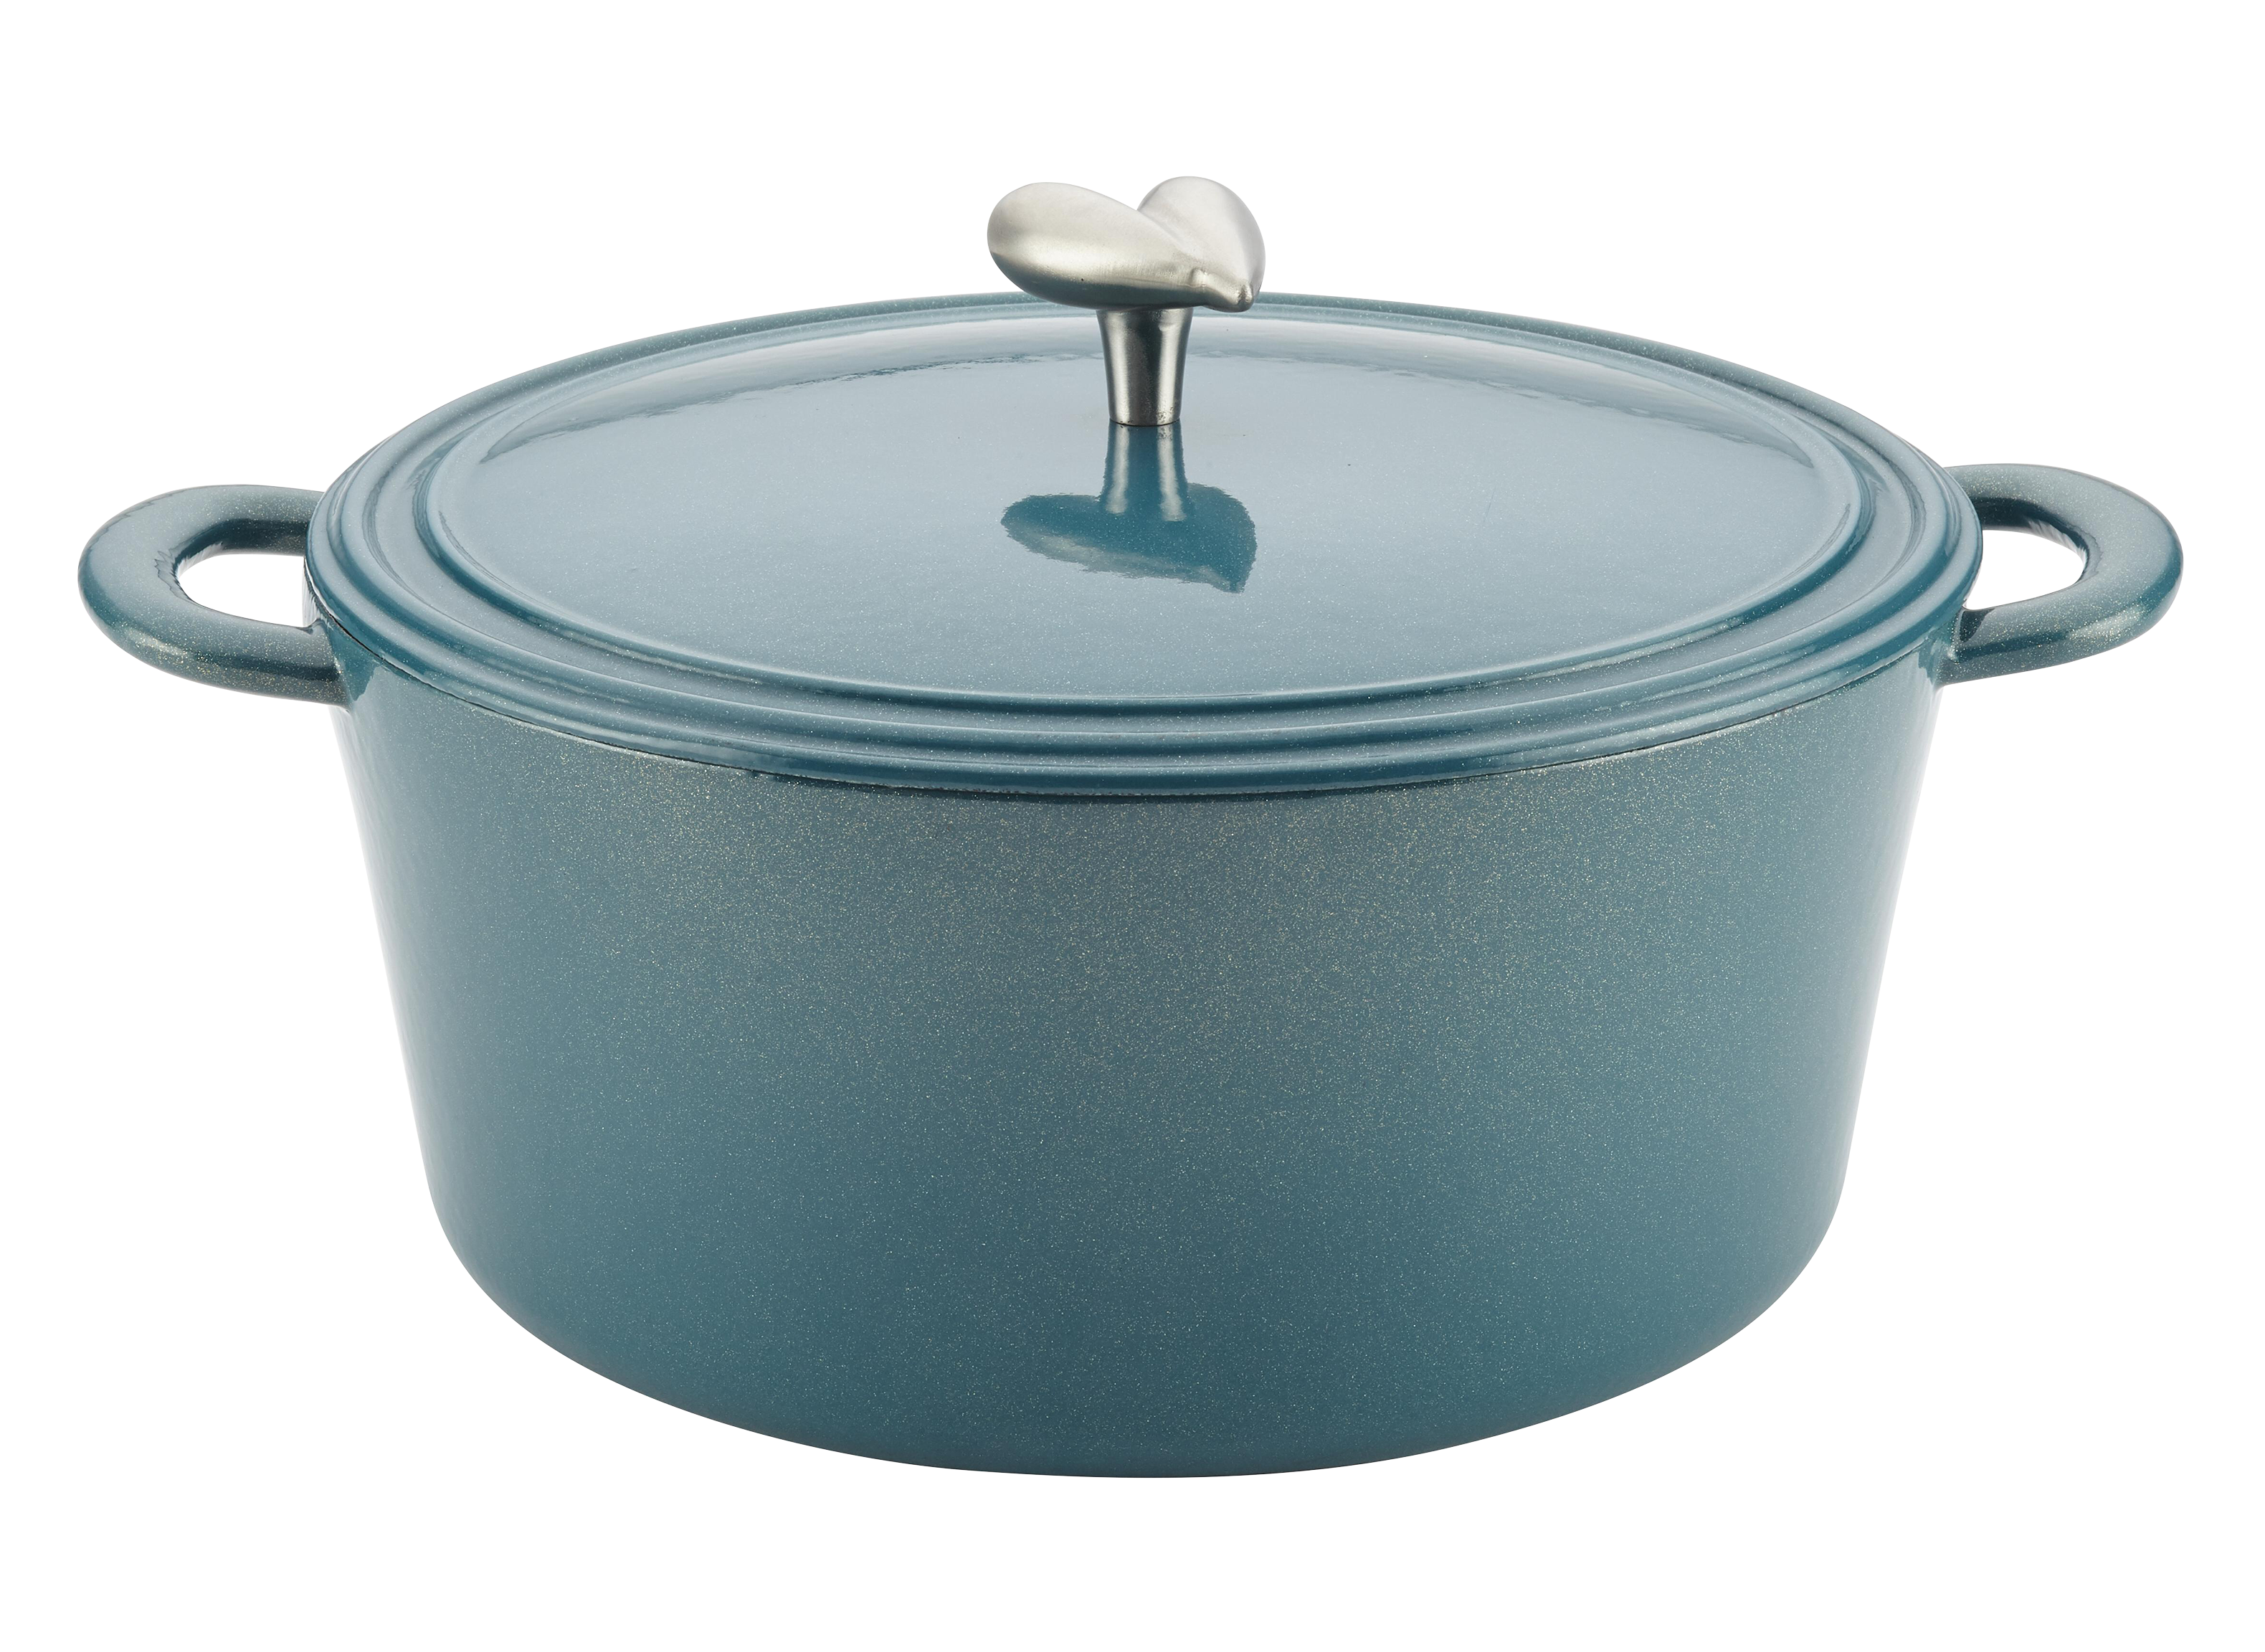 Ayesha Curry 48440 6 qt. Enameled Cast Iron Induction Dutch Oven with Lid, Anchor Blue